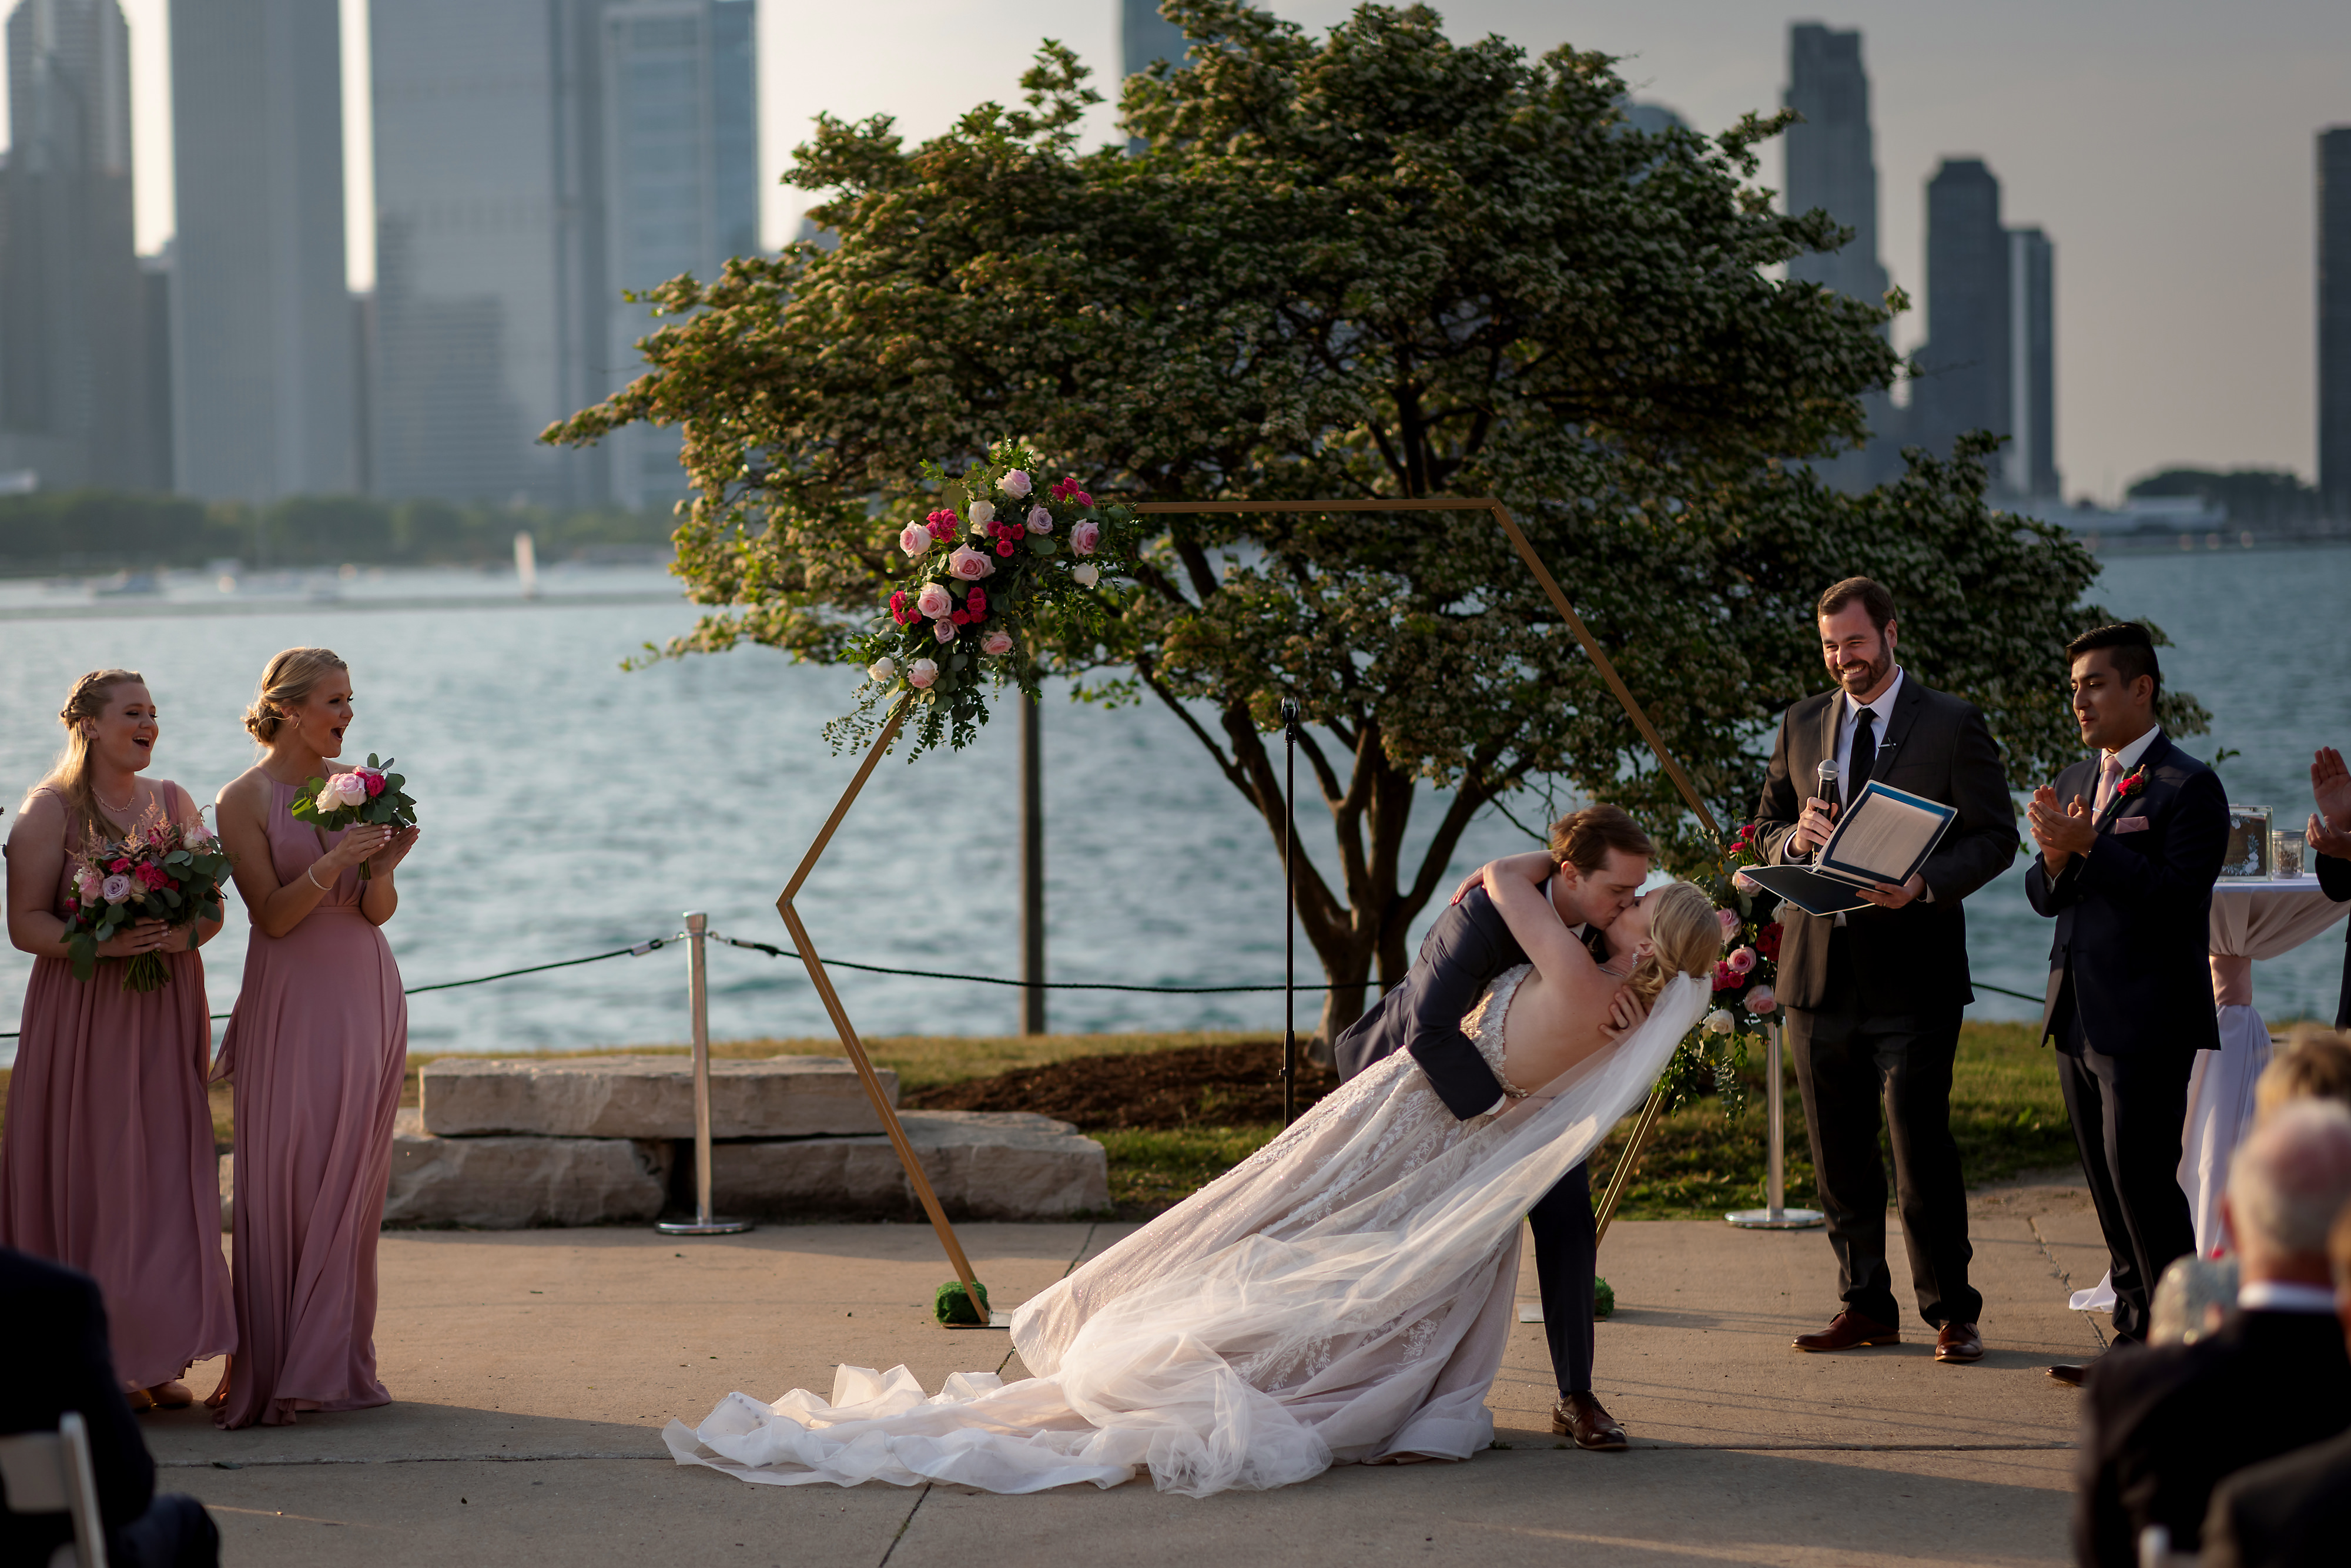 dip kiss at the end of outdoor wedding ceremony at Adler Planetarium in Chicago